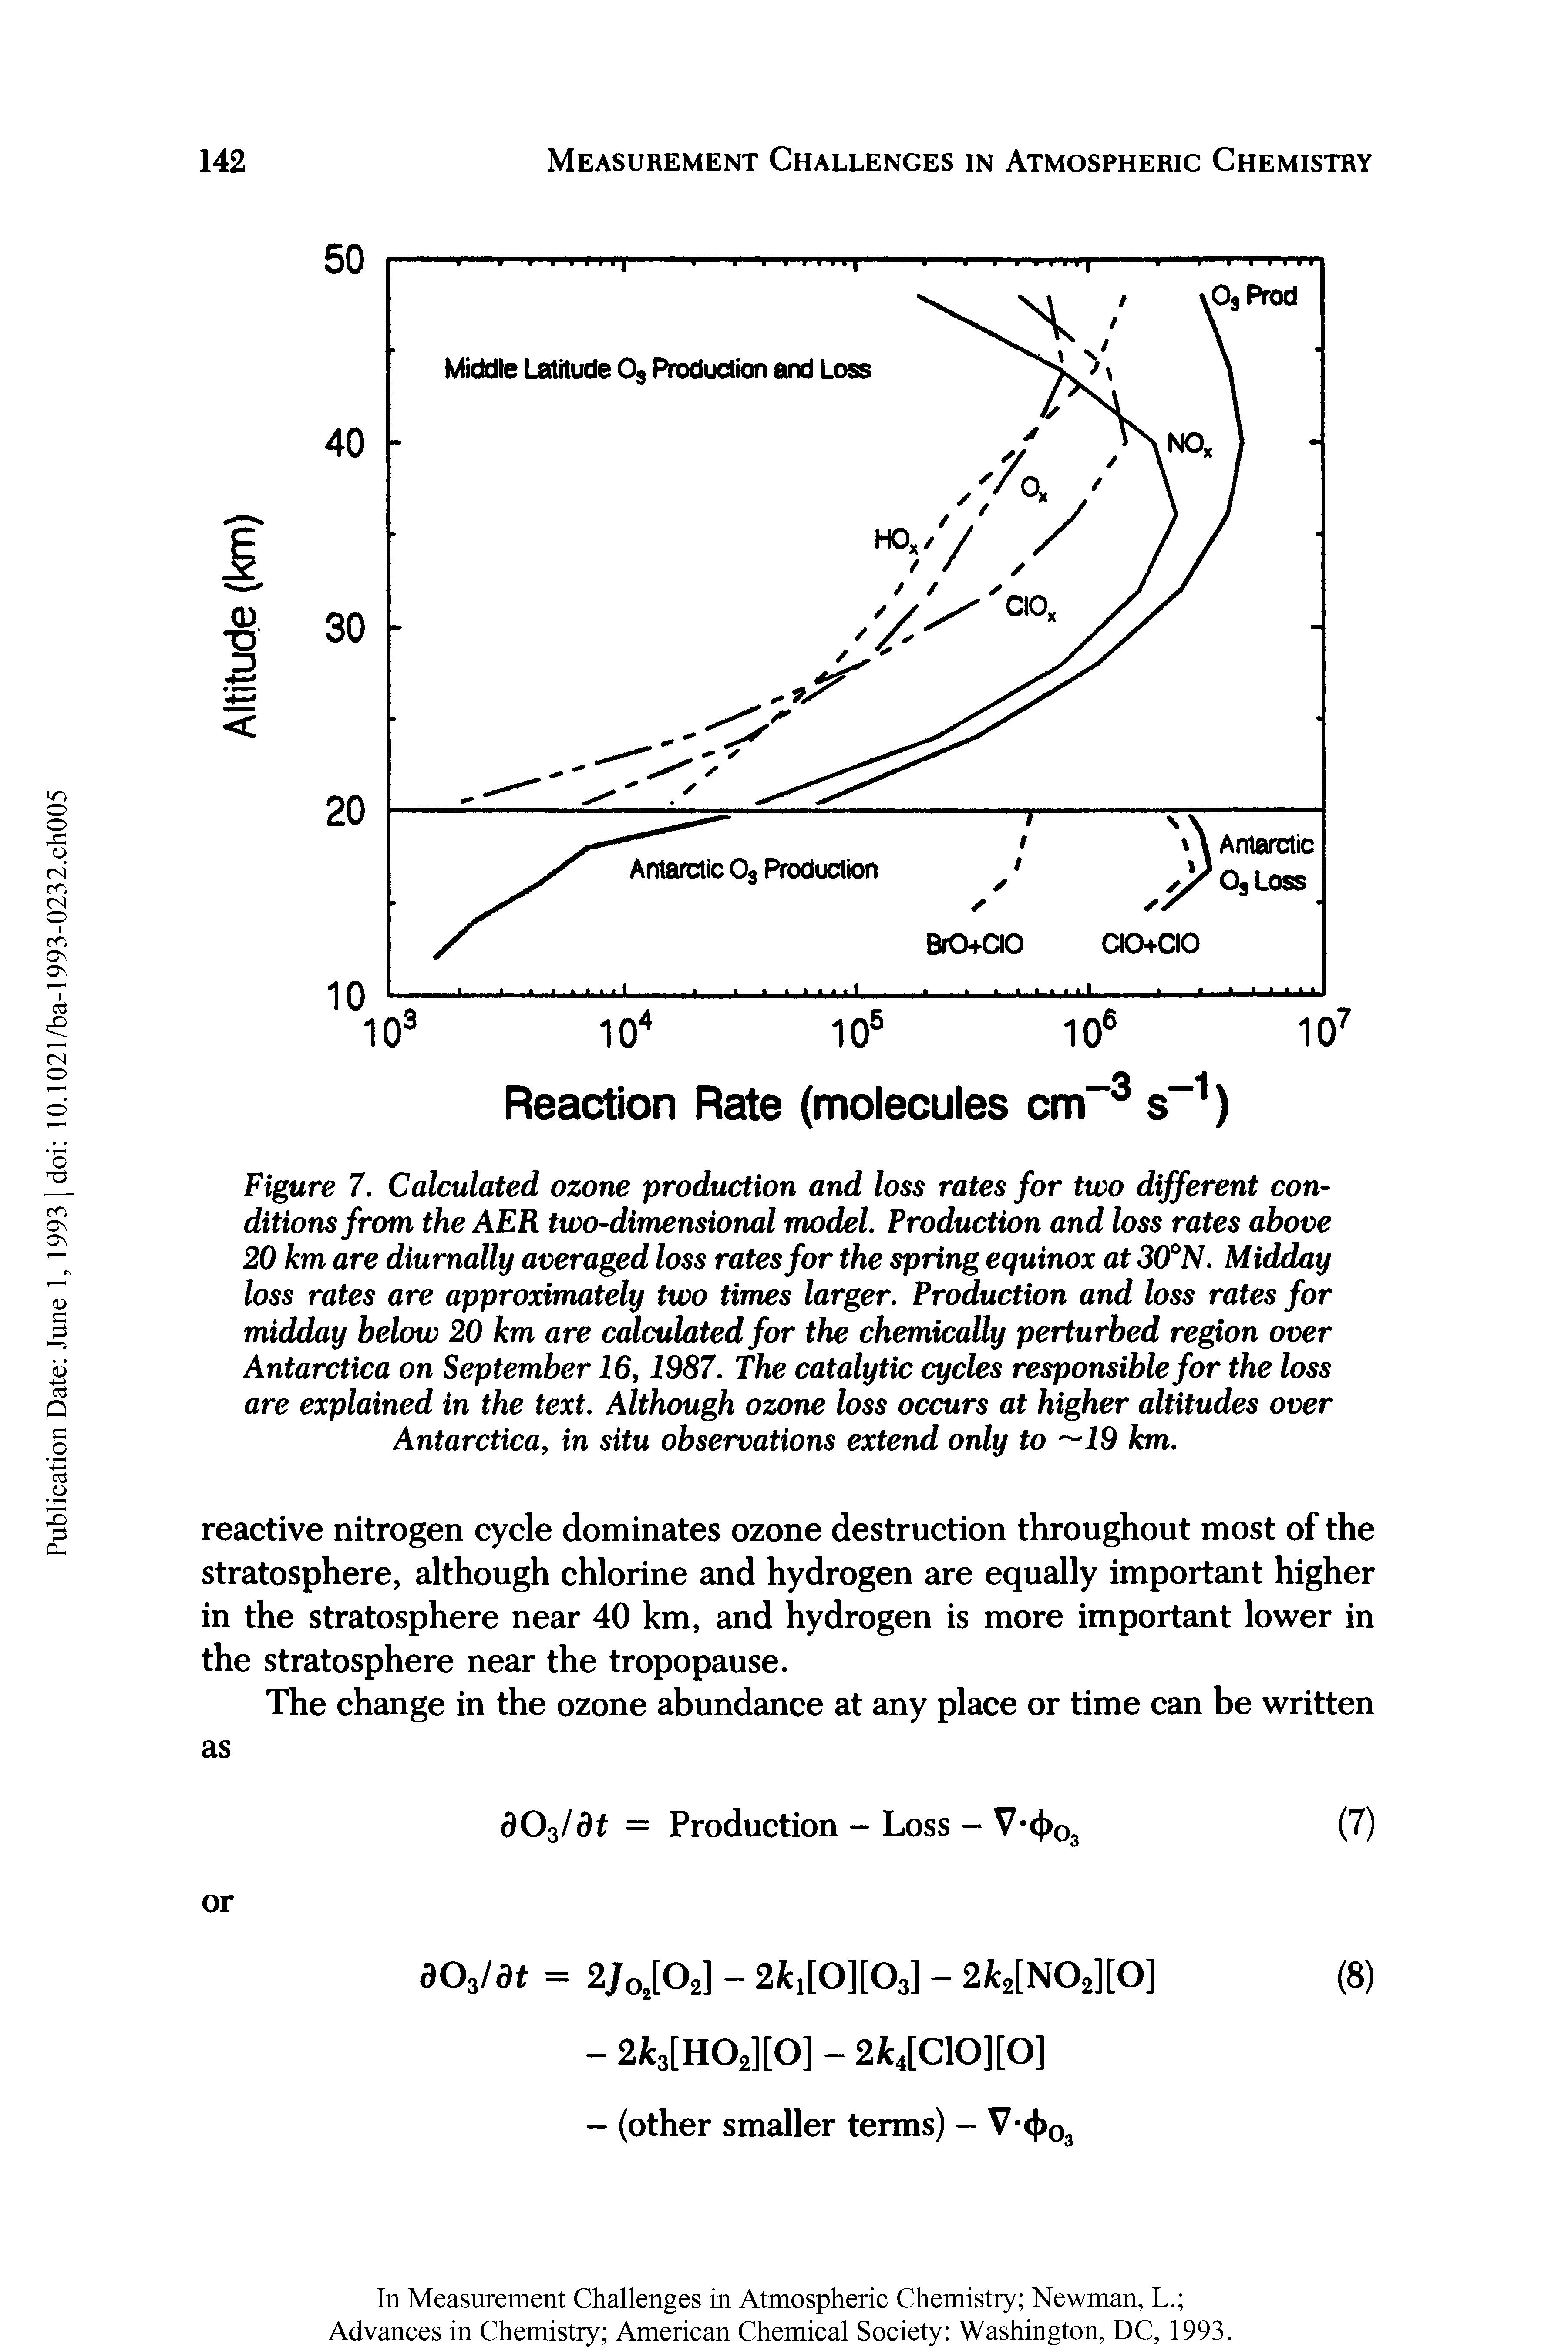 Figure 7. Calculated ozone production and loss rates for two different conditions from the AER two-dimensional model. Production and loss rates above 20 km are diurnally averaged loss rates for the spring equinox at 30°N. Midday loss rates are approximately two times larger. Production and loss rates for midday below 20 km are calculated for the chemically perturbed region over Antarctica on September 16,1987. The catalytic cycles responsible for the loss are explained in the text. Although ozone loss occurs at higher altitudes over Antarctica, in situ observations extend only to 19 km.